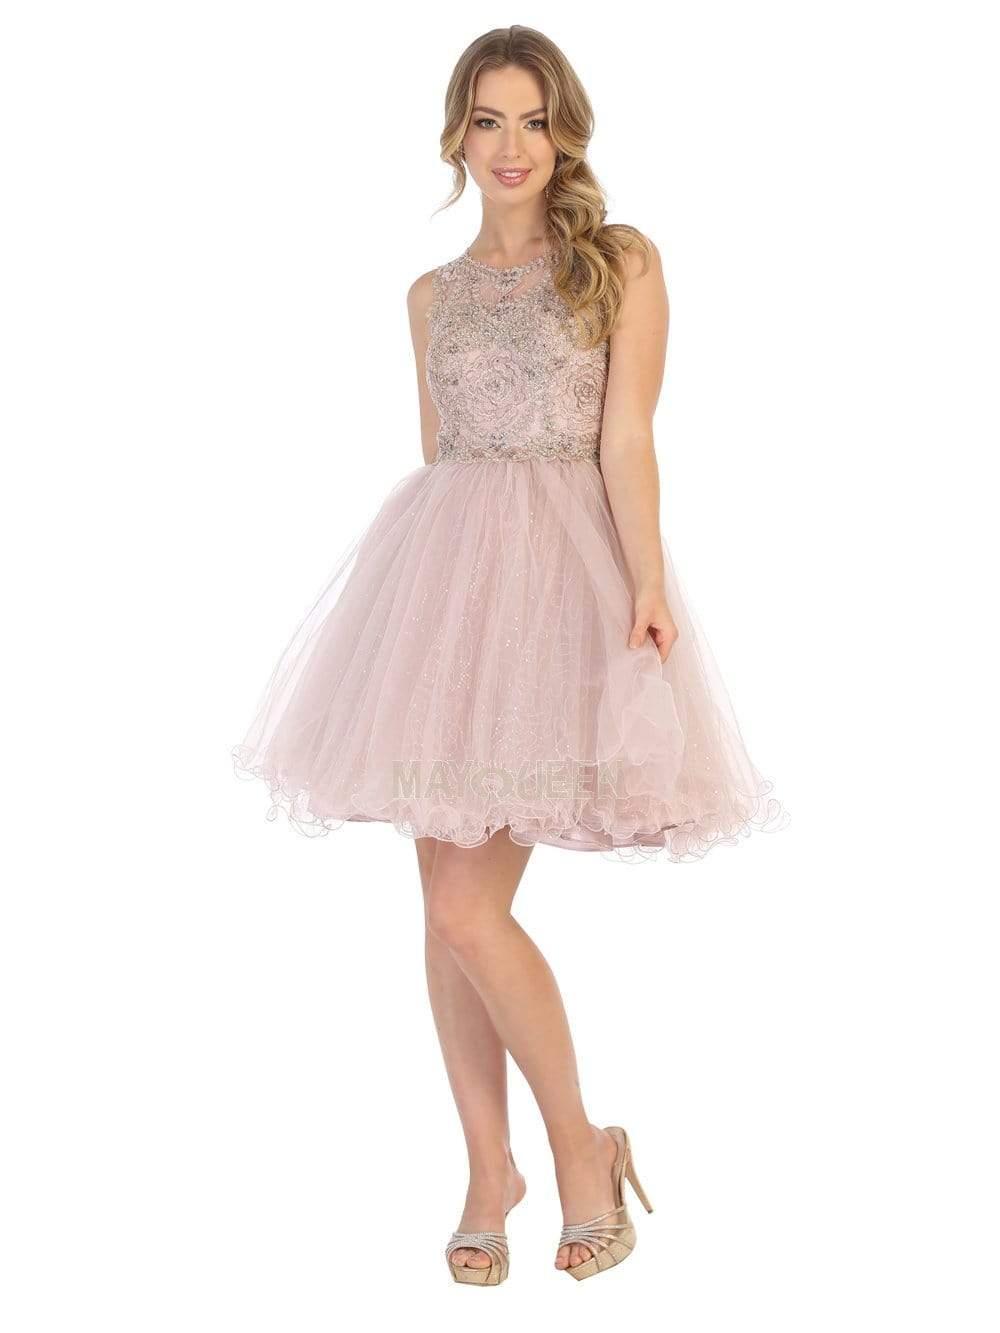 May Queen - MQ1726 Rosette Appliqued Glitter Tulle Dress Cocktail Dresses 4 / Mauve